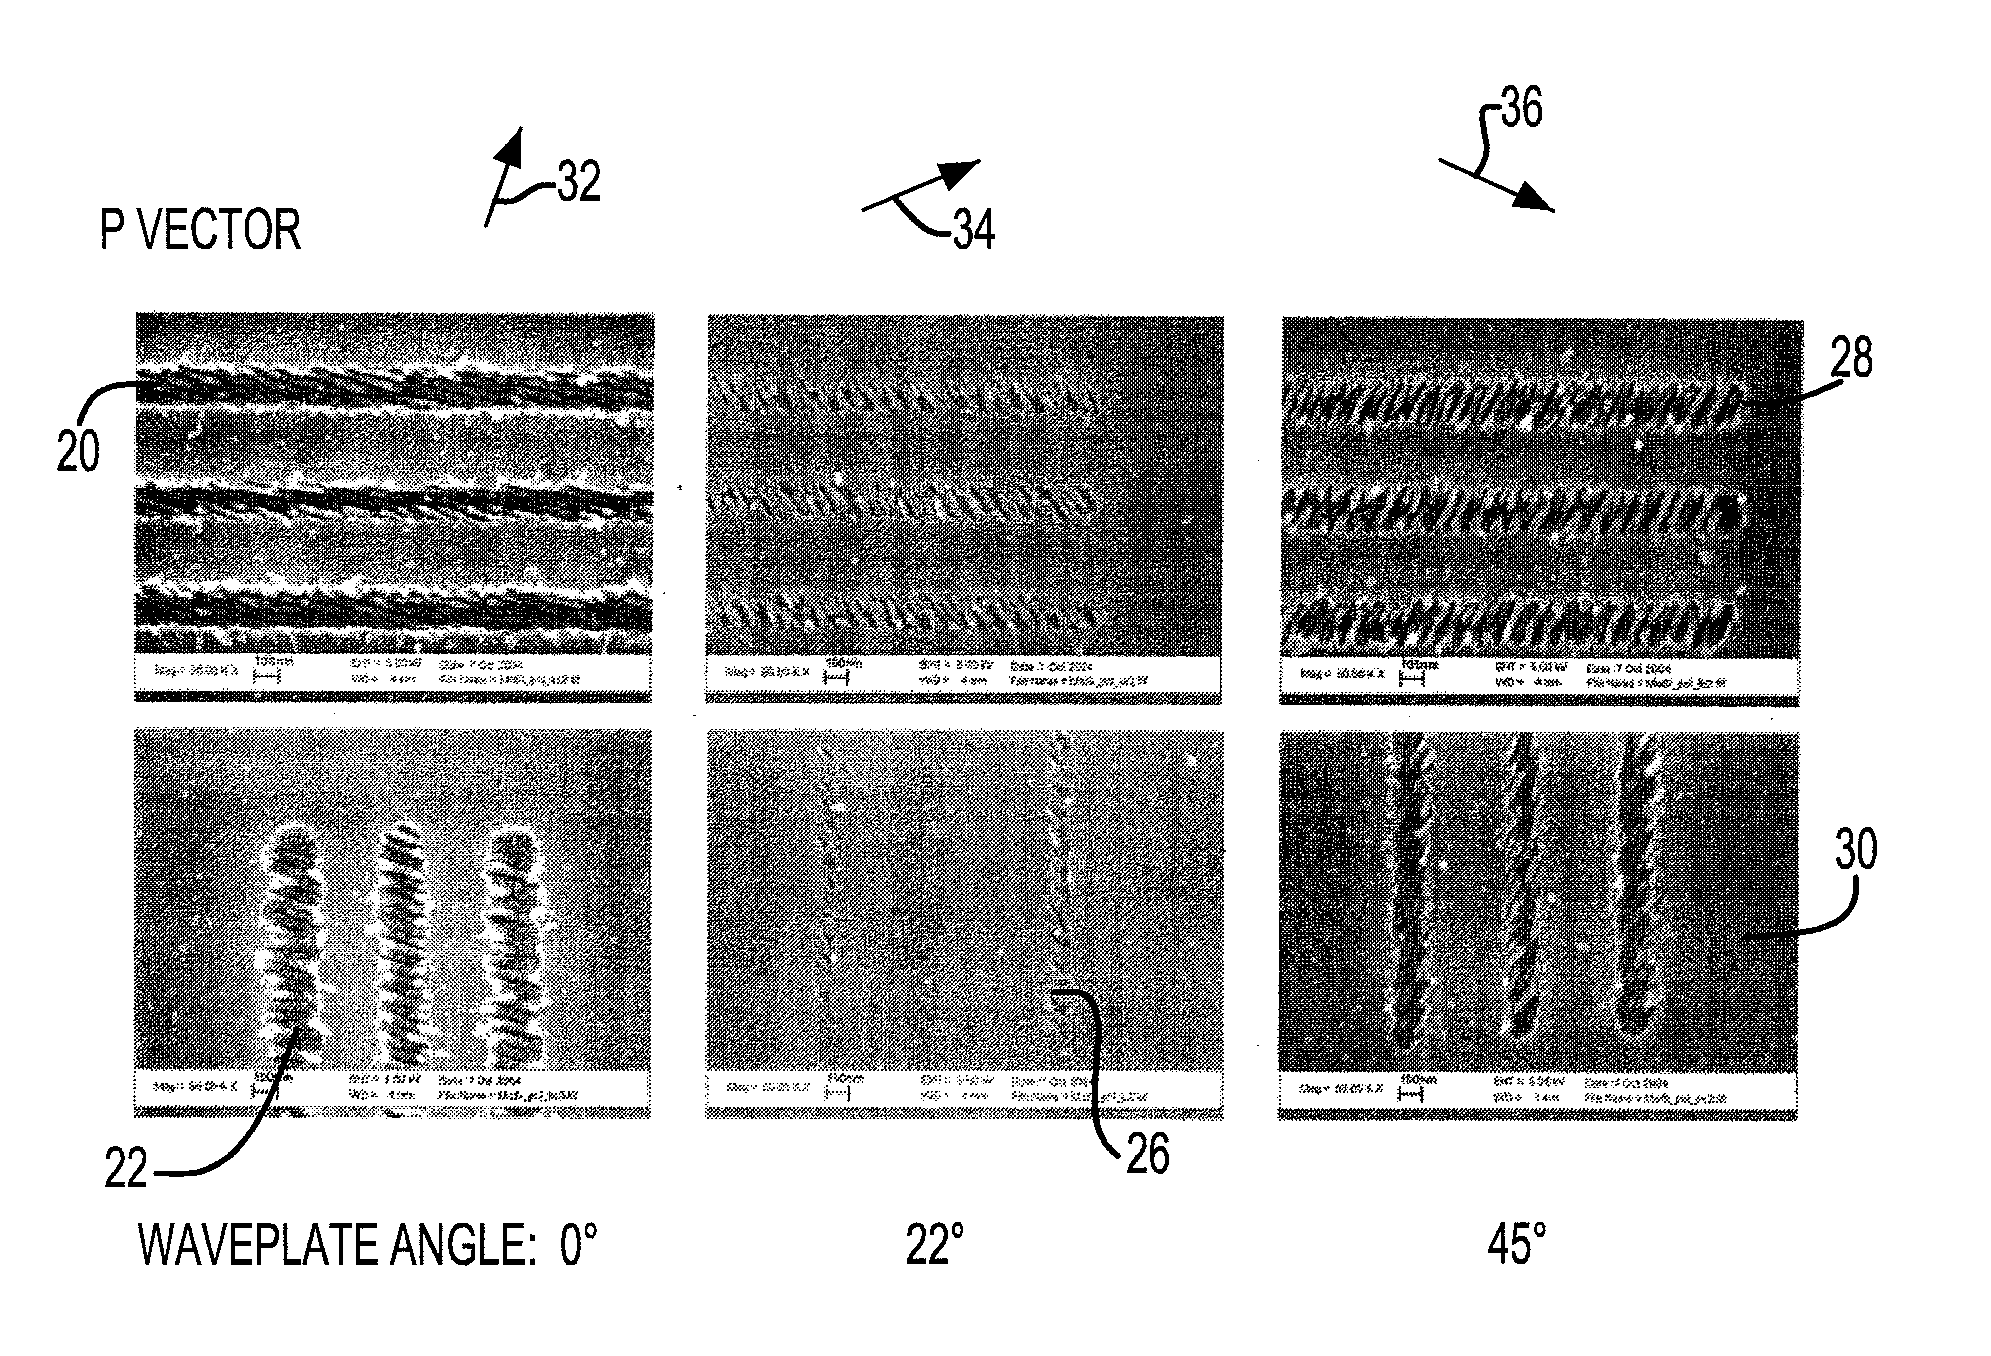 System and method for eliminating the structure and edge roughness produced during laser ablation of a material